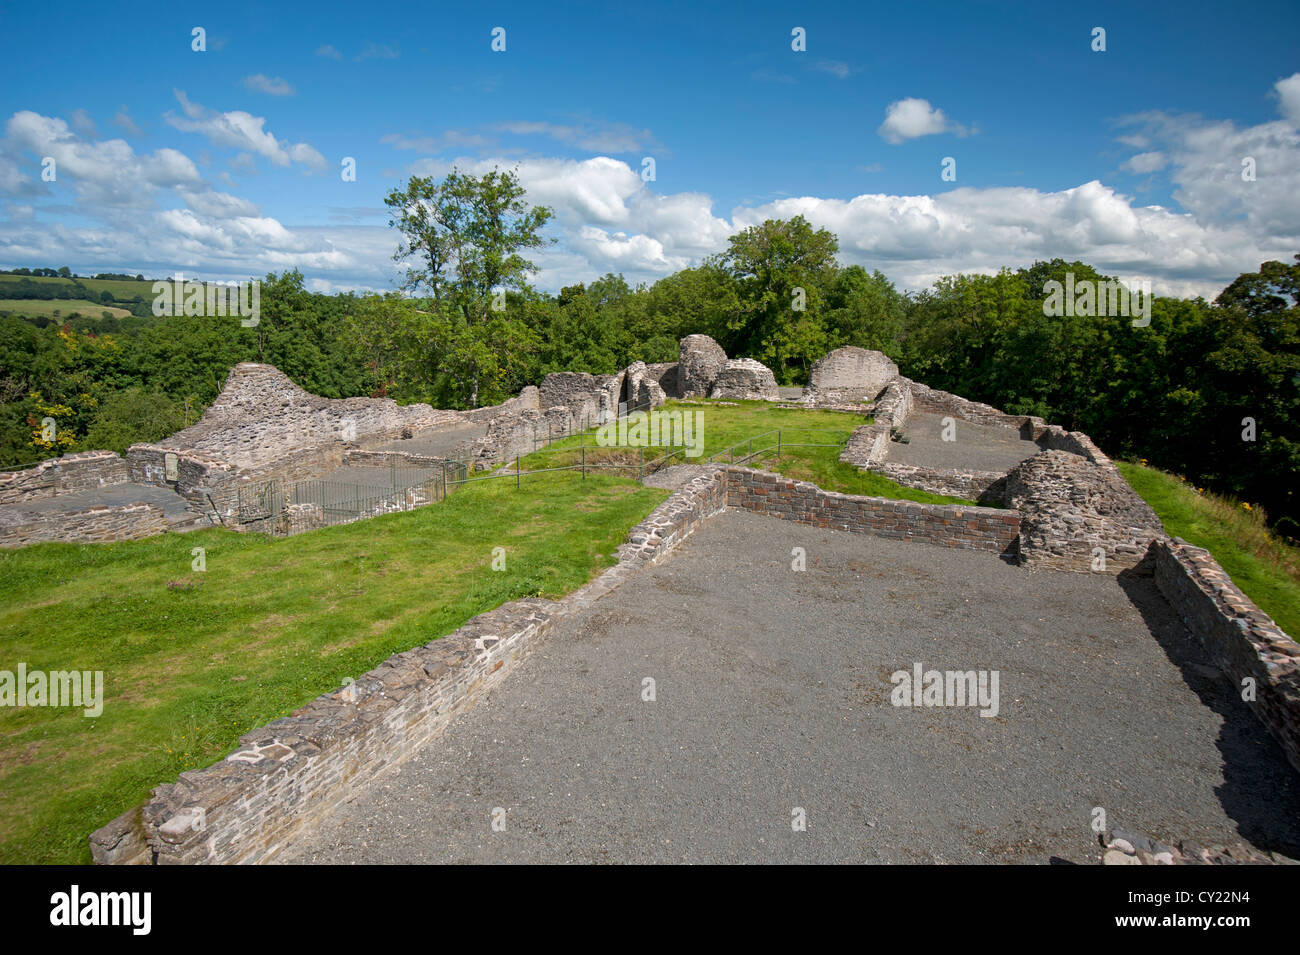 Dolforwyn Castle, recently excavated ruins in Powys, Montgomeryshire. Mid Wales.  SCO 8710 Stock Photo